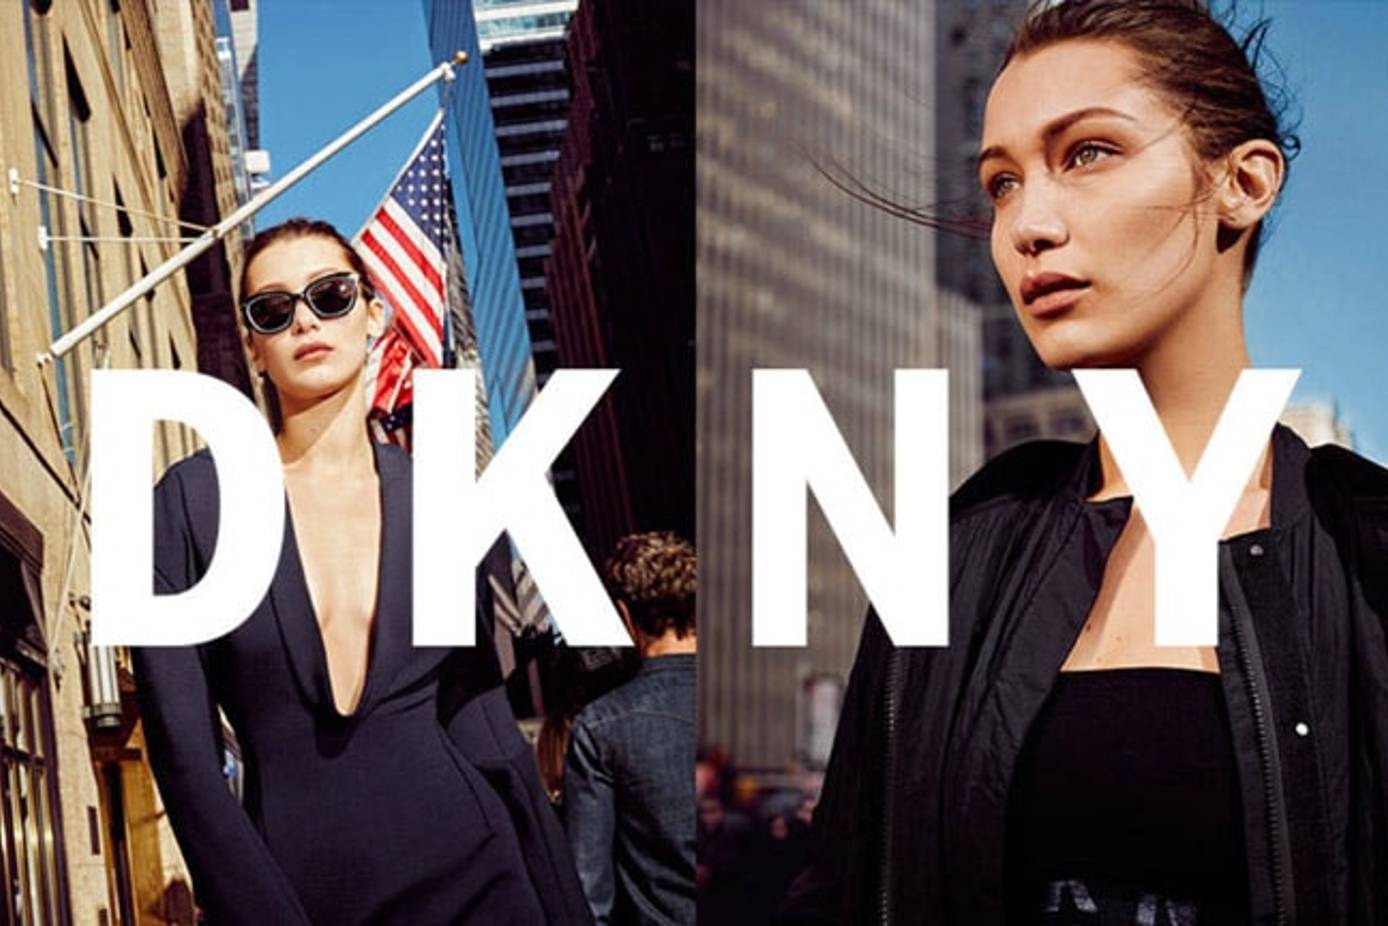 DKNY chooses Farfetch to boost brand and e-commerce